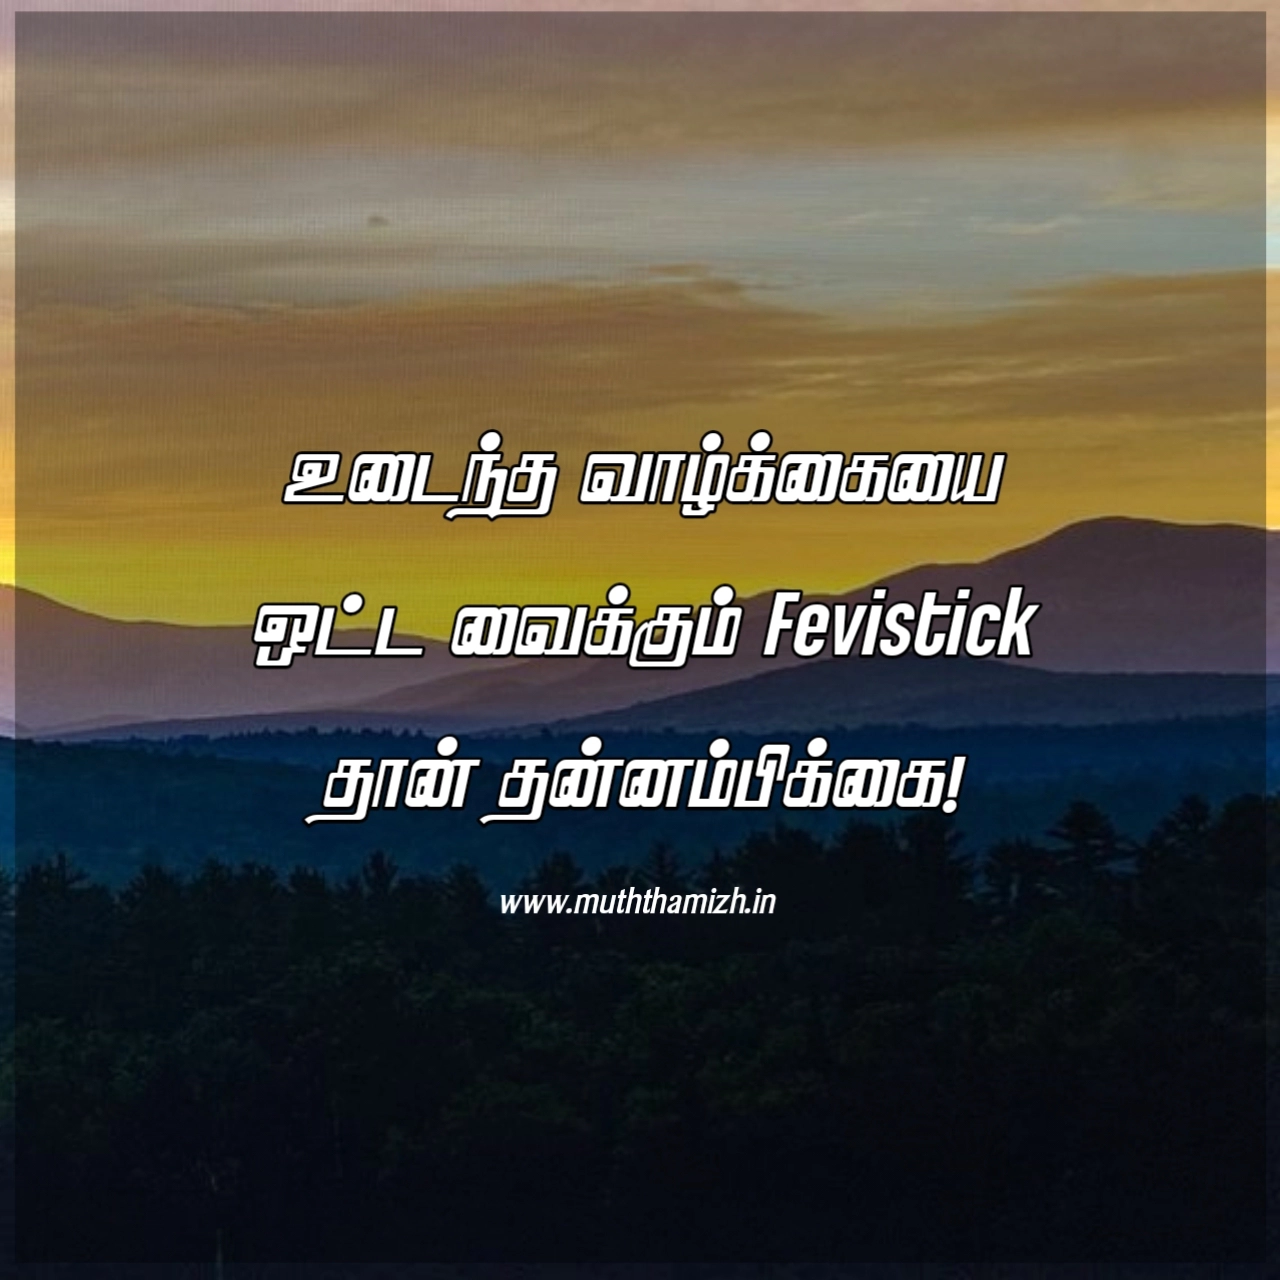 Tamil-Motivational-Quotes